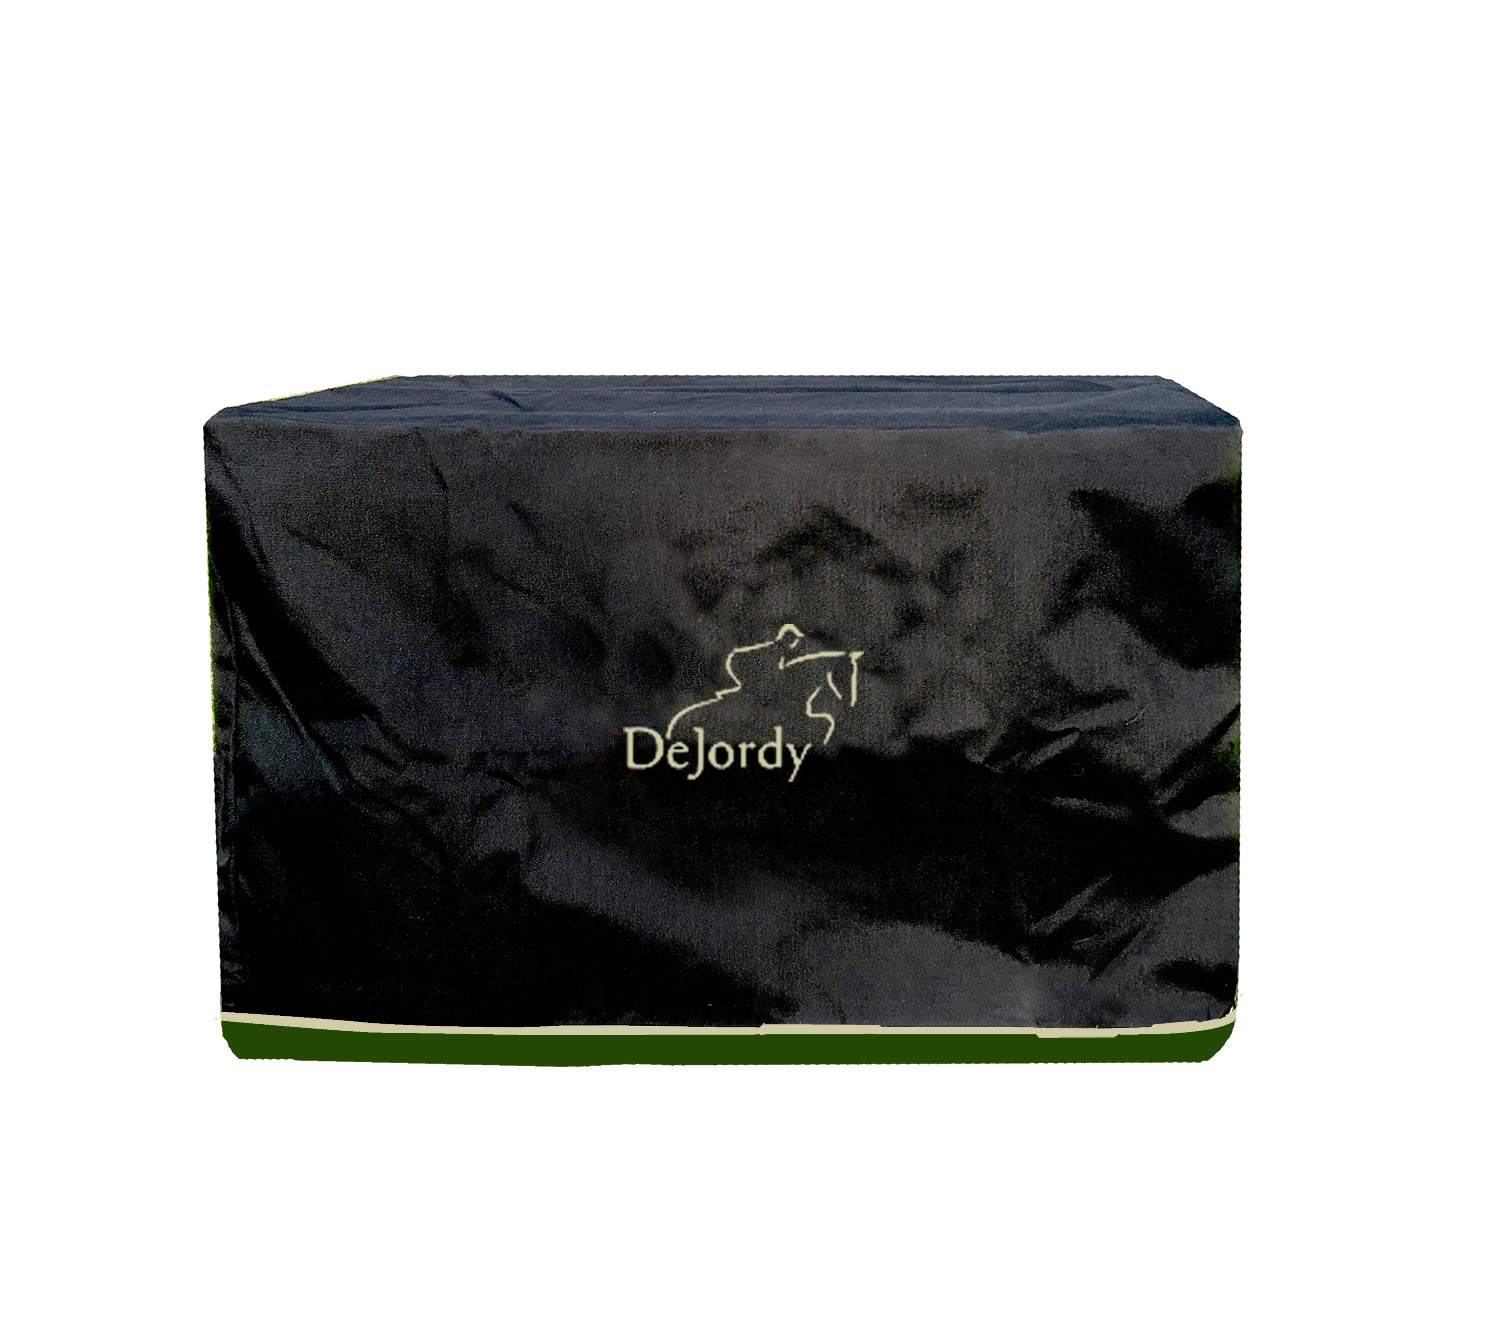 Dejordy Trunk Cover